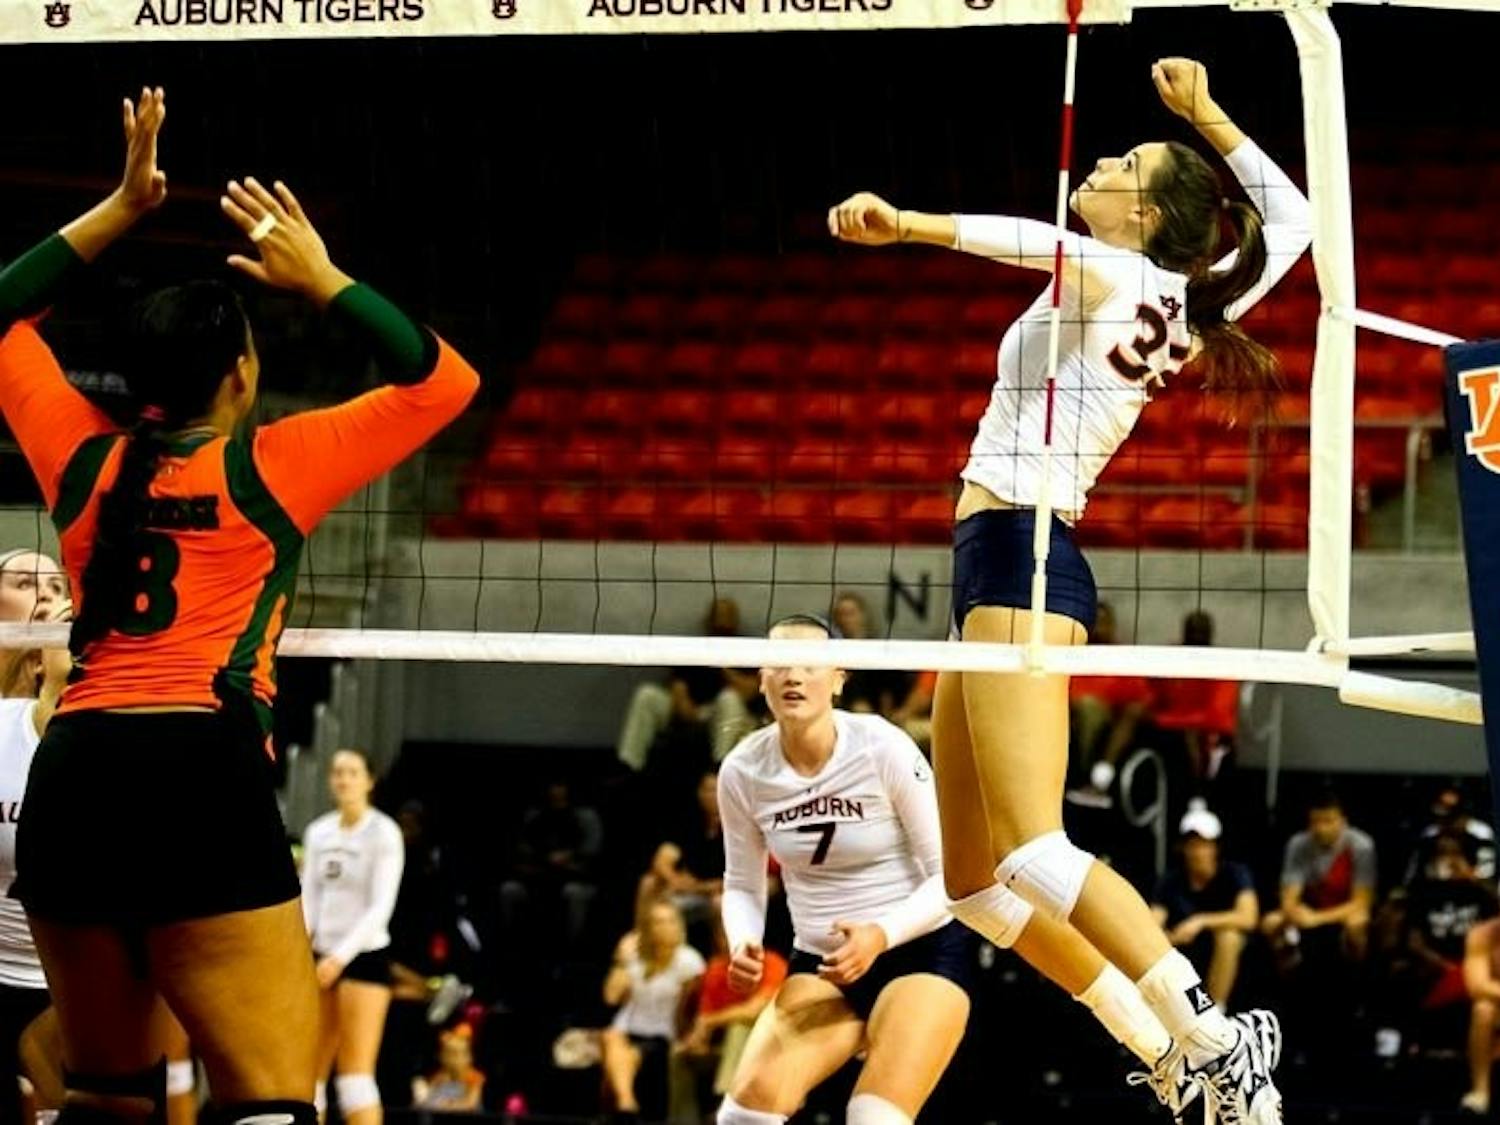 Macy Reece (#33) jumping high to hit the ball. (Kenny Moss | Photographer)